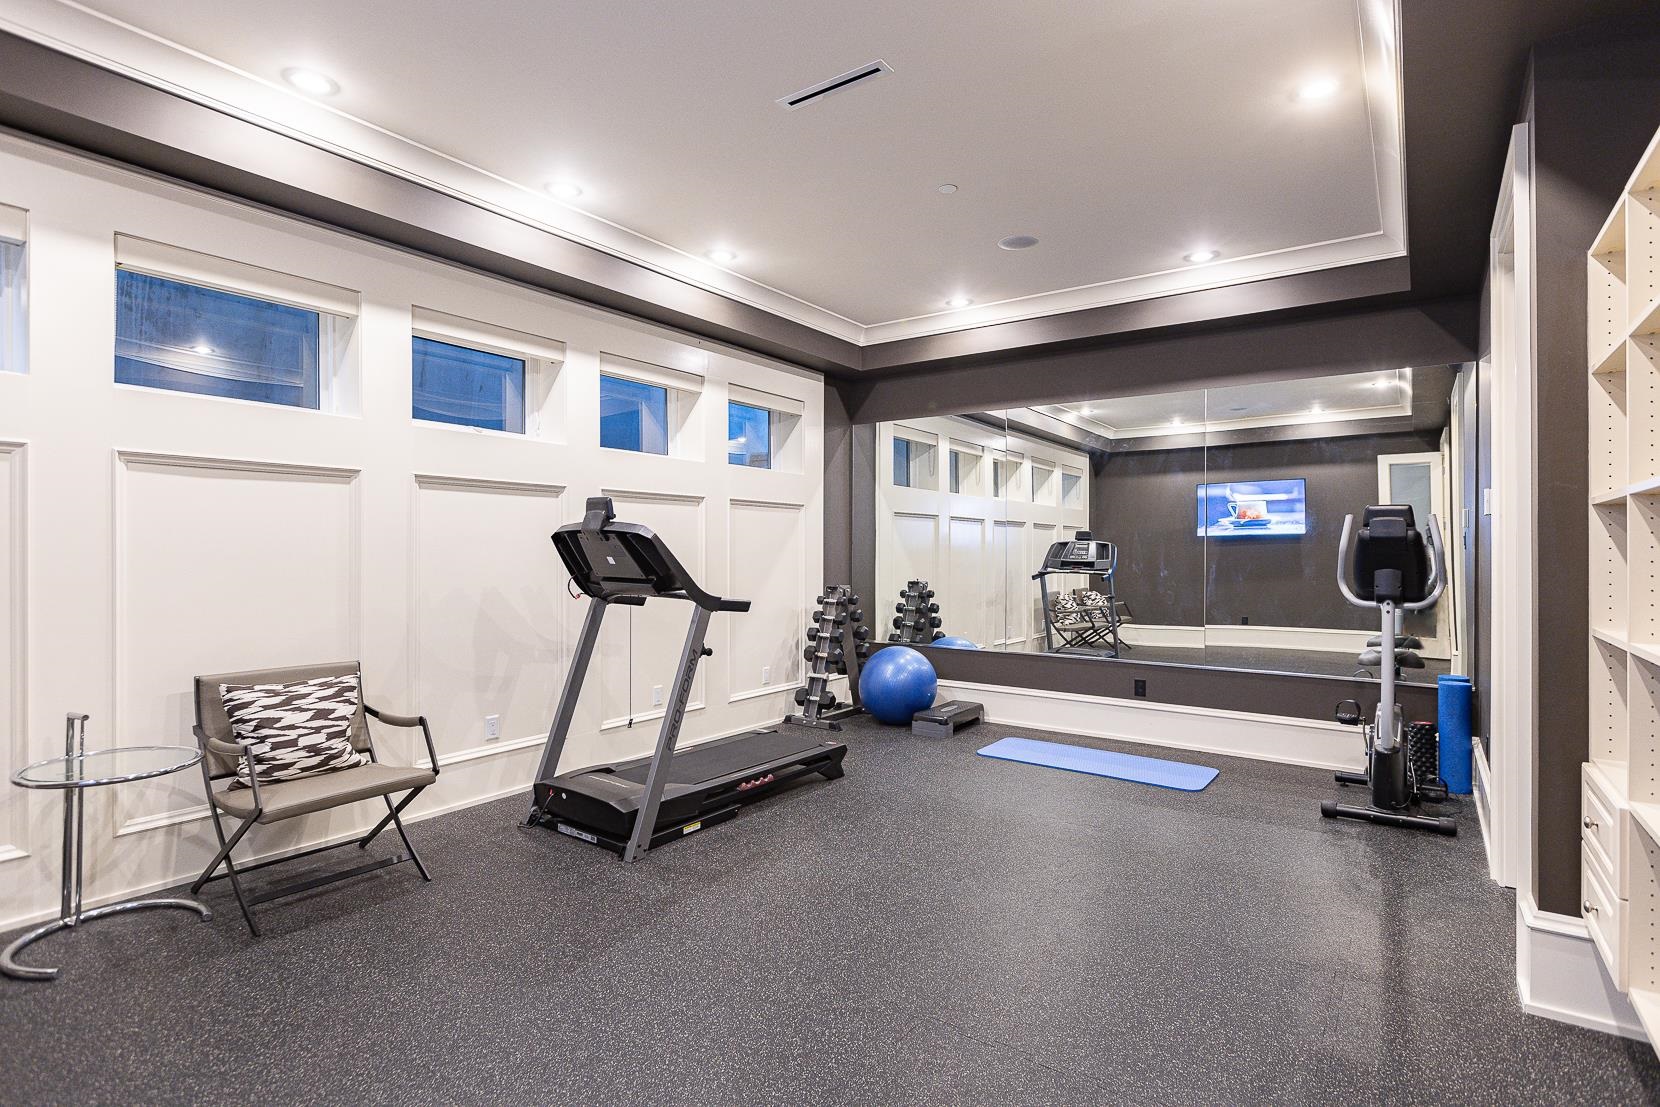 Stay active and maintain your fitness routine in a fully equipped private gym